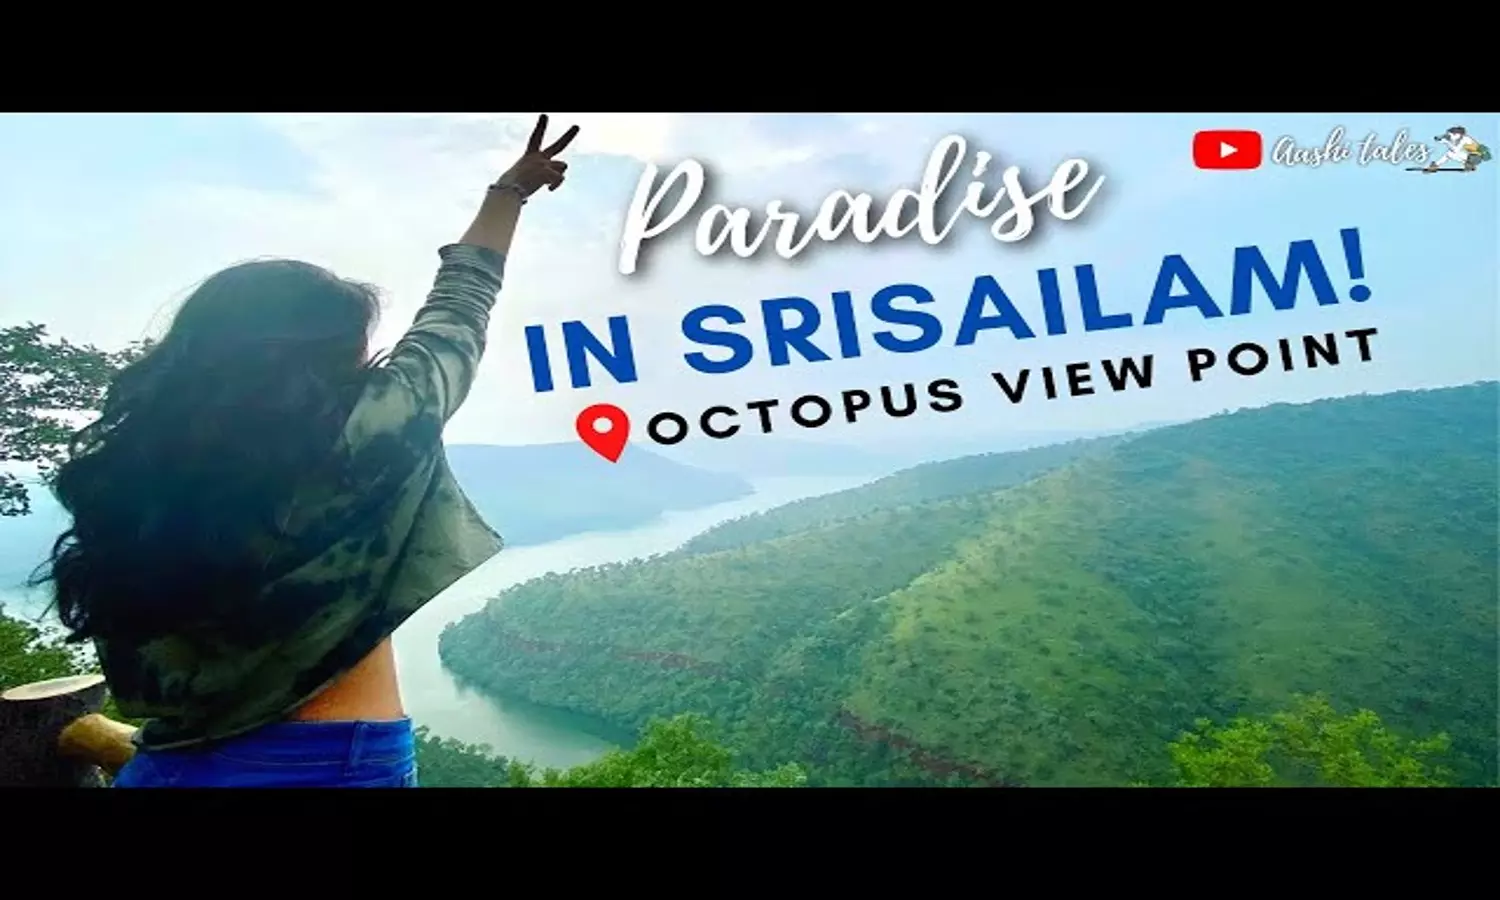 OCTOPUS VIEW POINT